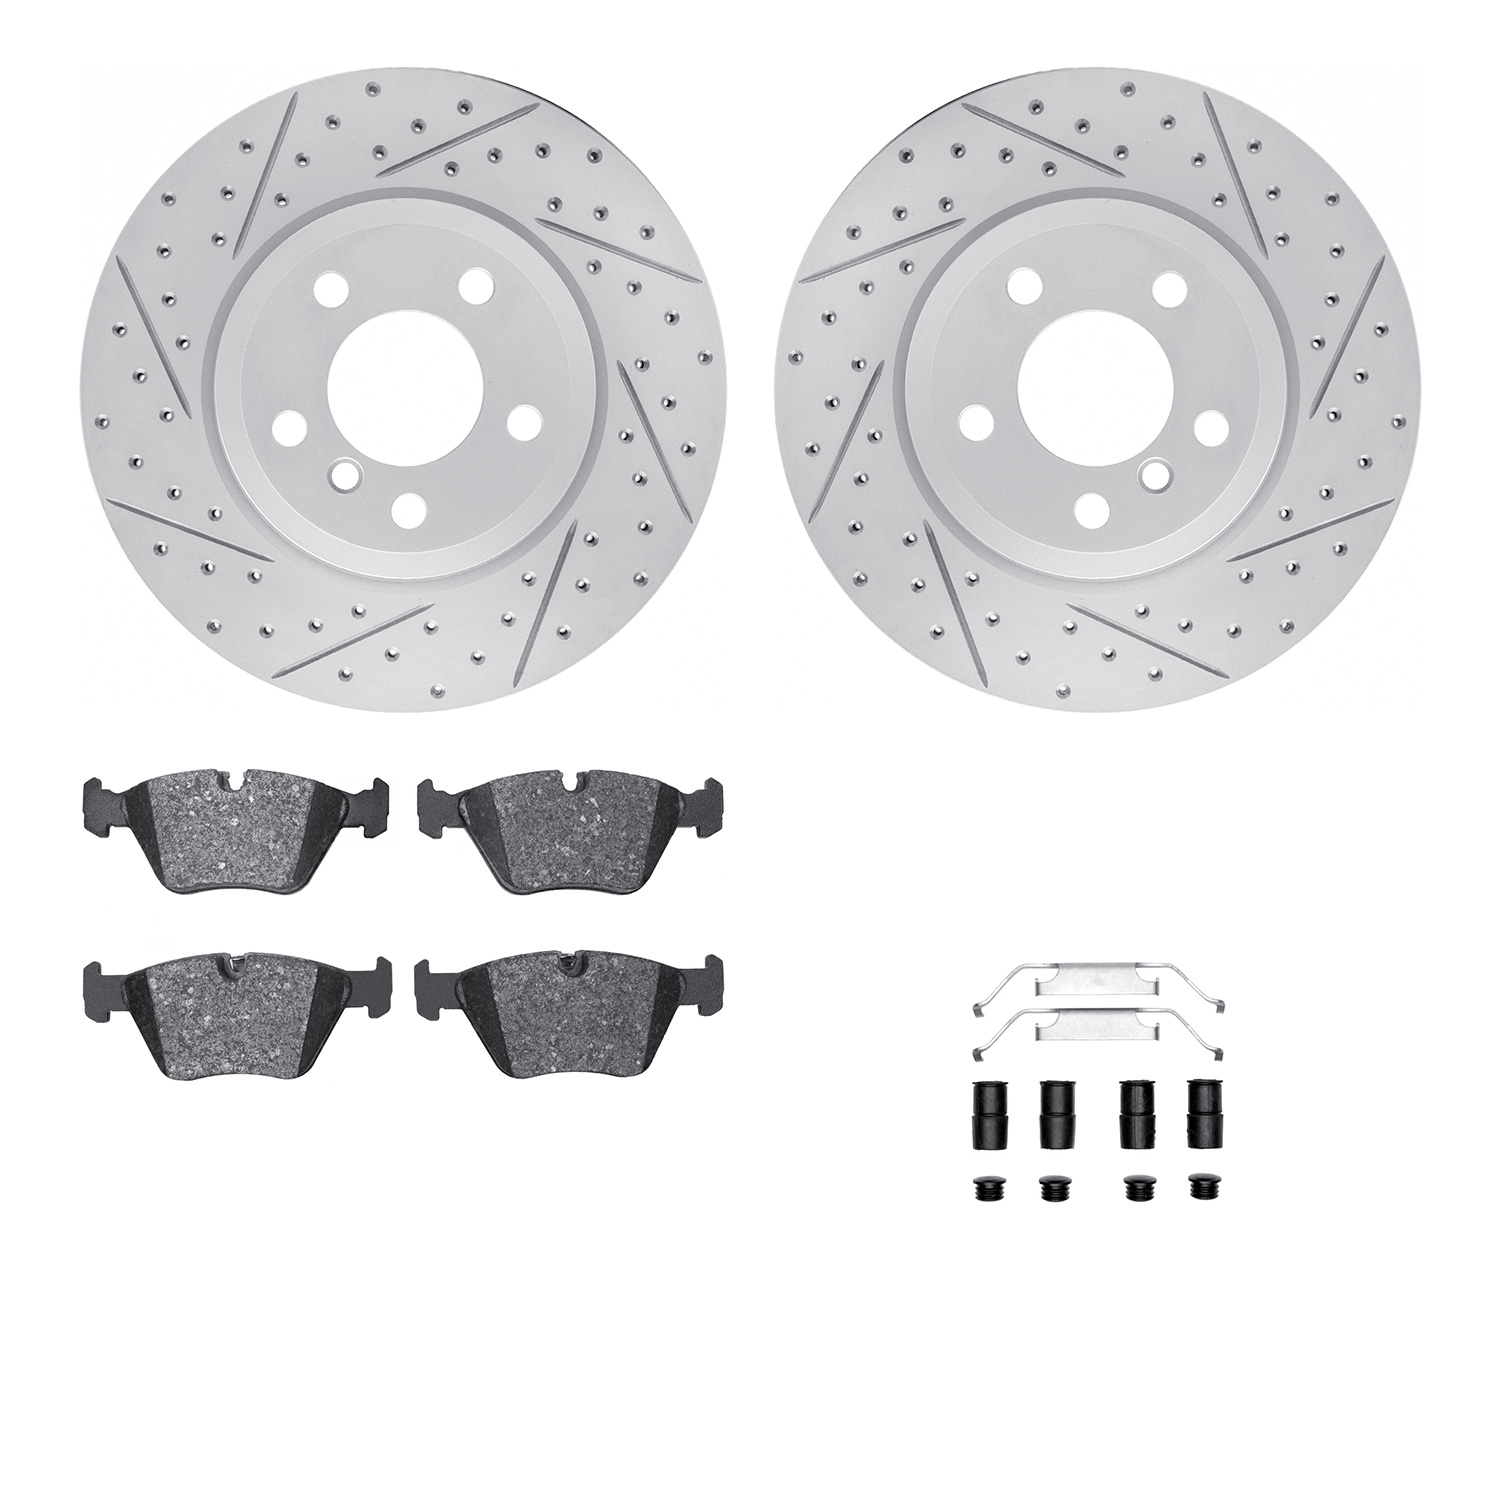 2512-31101 Geoperformance Drilled/Slotted Rotors w/5000 Advanced Brake Pads Kit & Hardware, 2004-2010 BMW, Position: Front